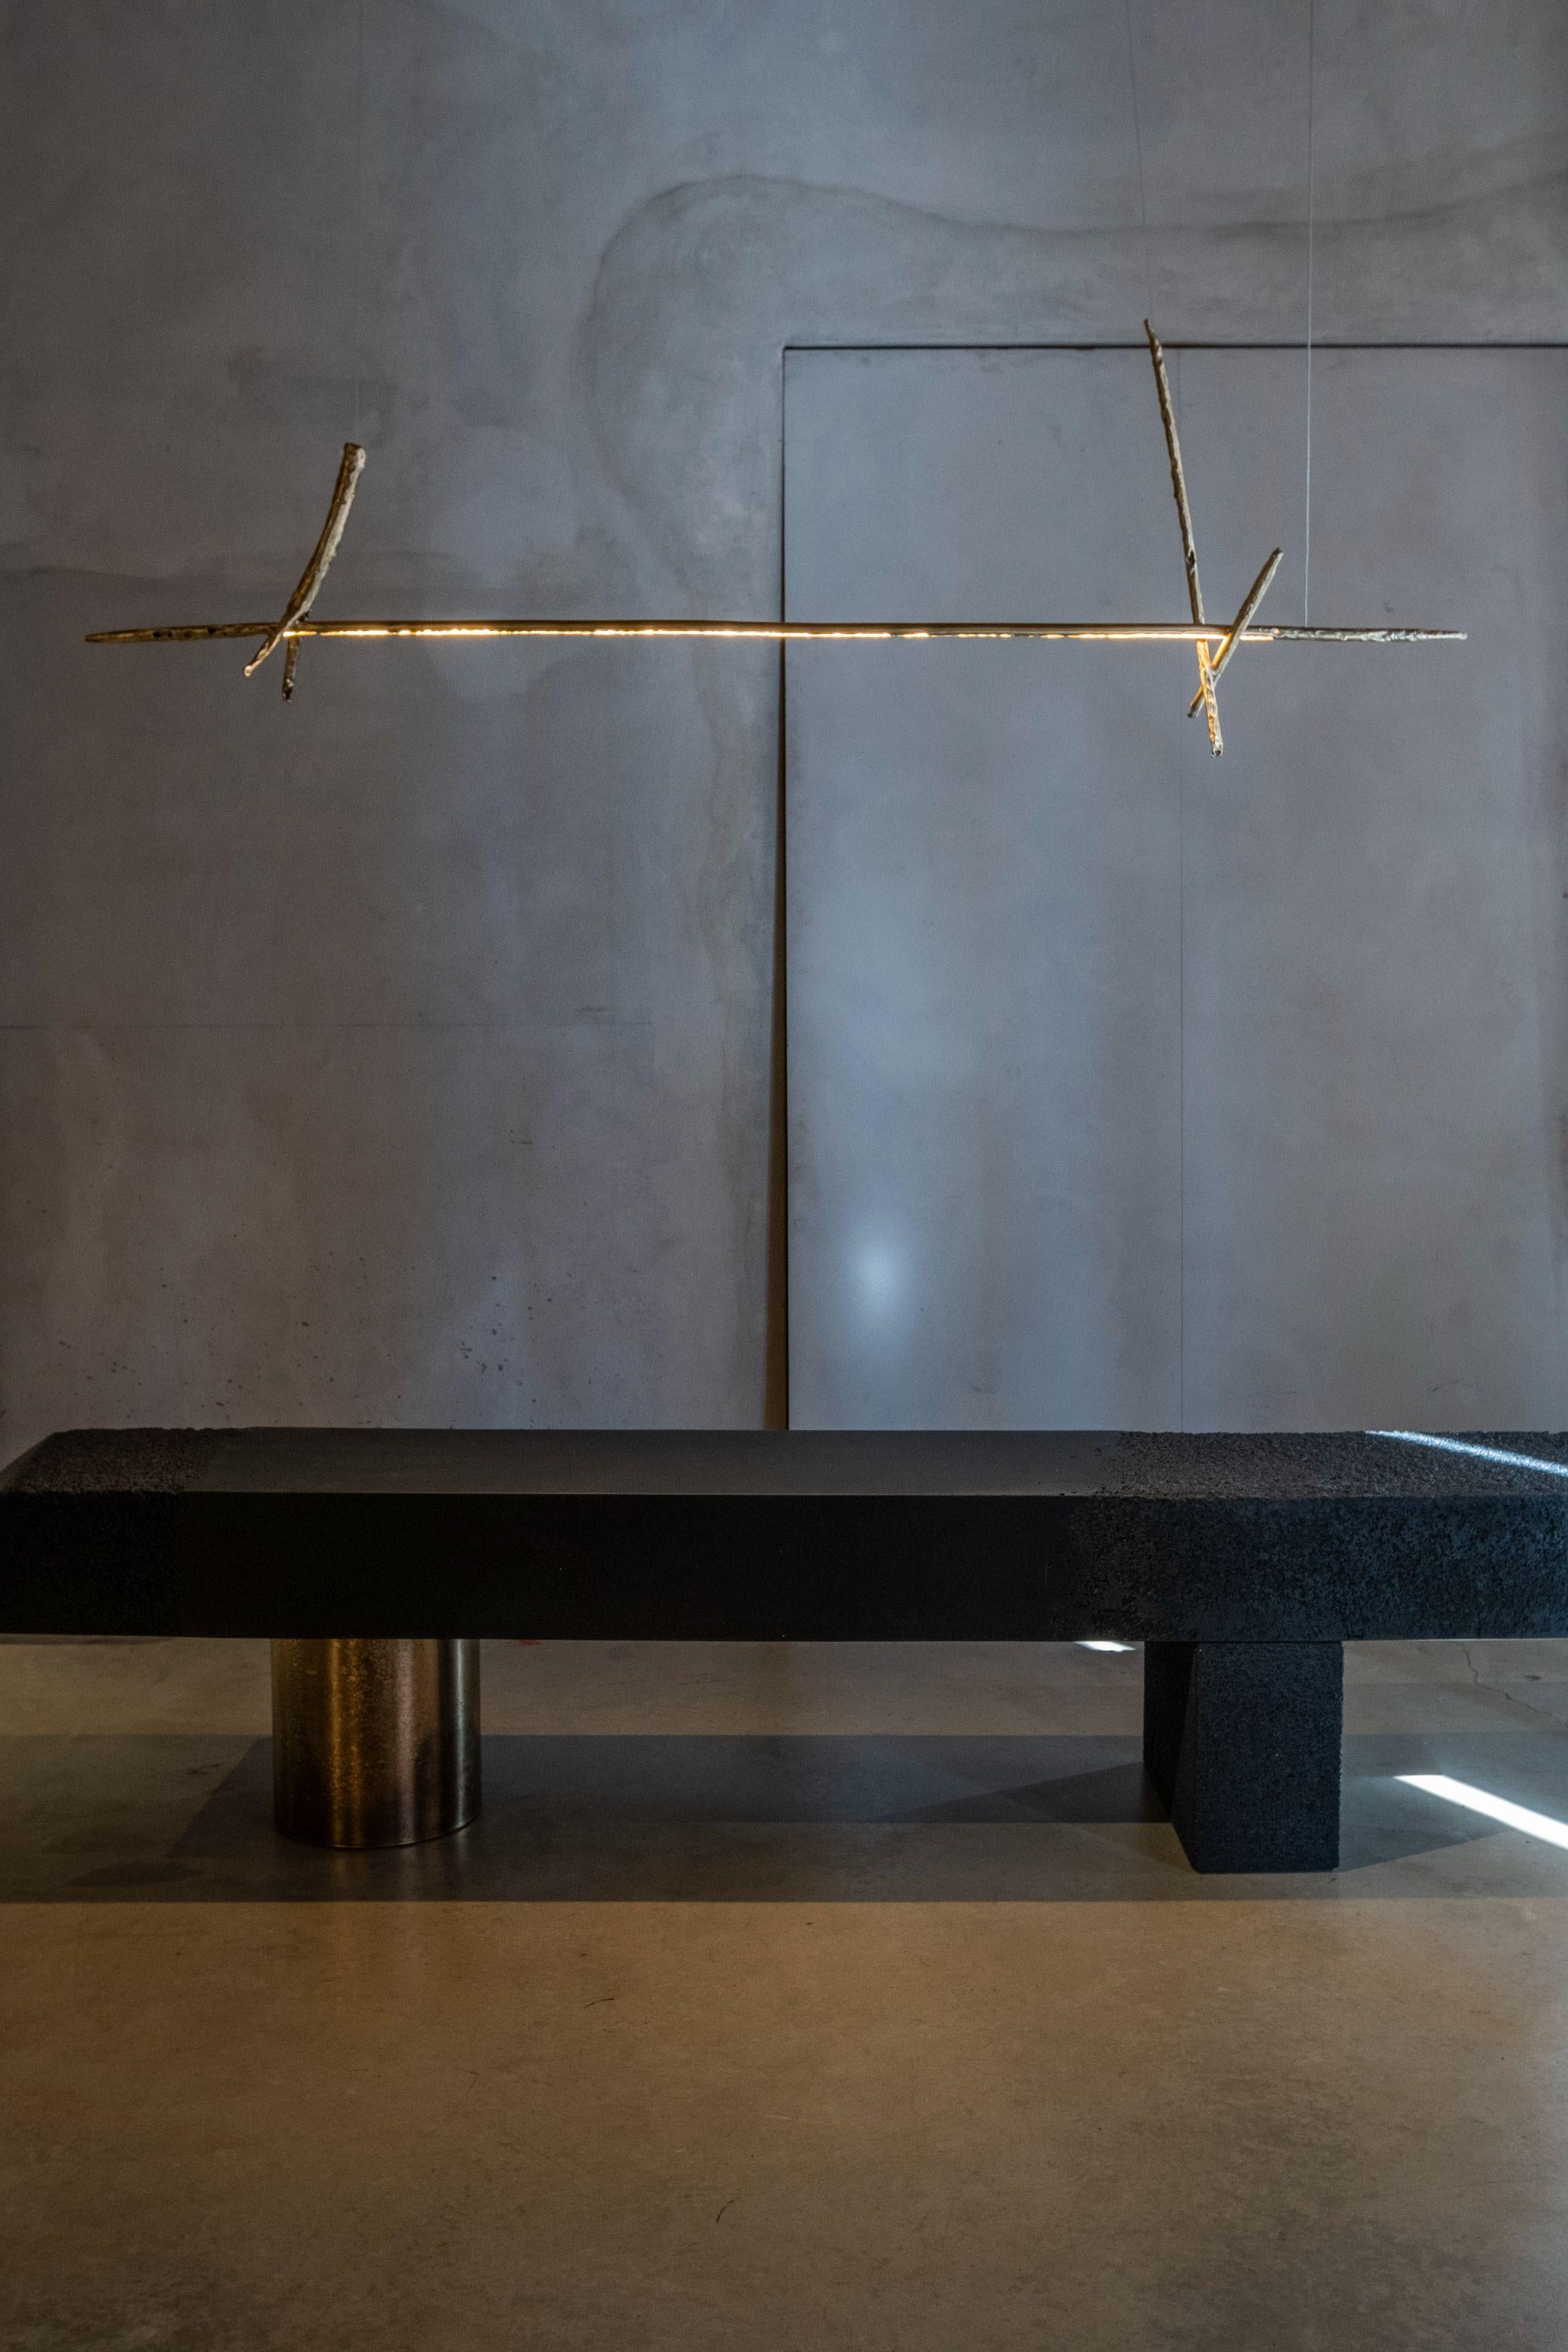 Prometeo chandelier by Morghen Studio
Materials: Brass, LED light, silicone
Dimensions: 165 x 20 x 50 cm
Light source: LED 24v - 20 w - 2.500 lm - 2.700/3.000 k - dimmable

Prometeo is a Collection of objects arisen from the research on a